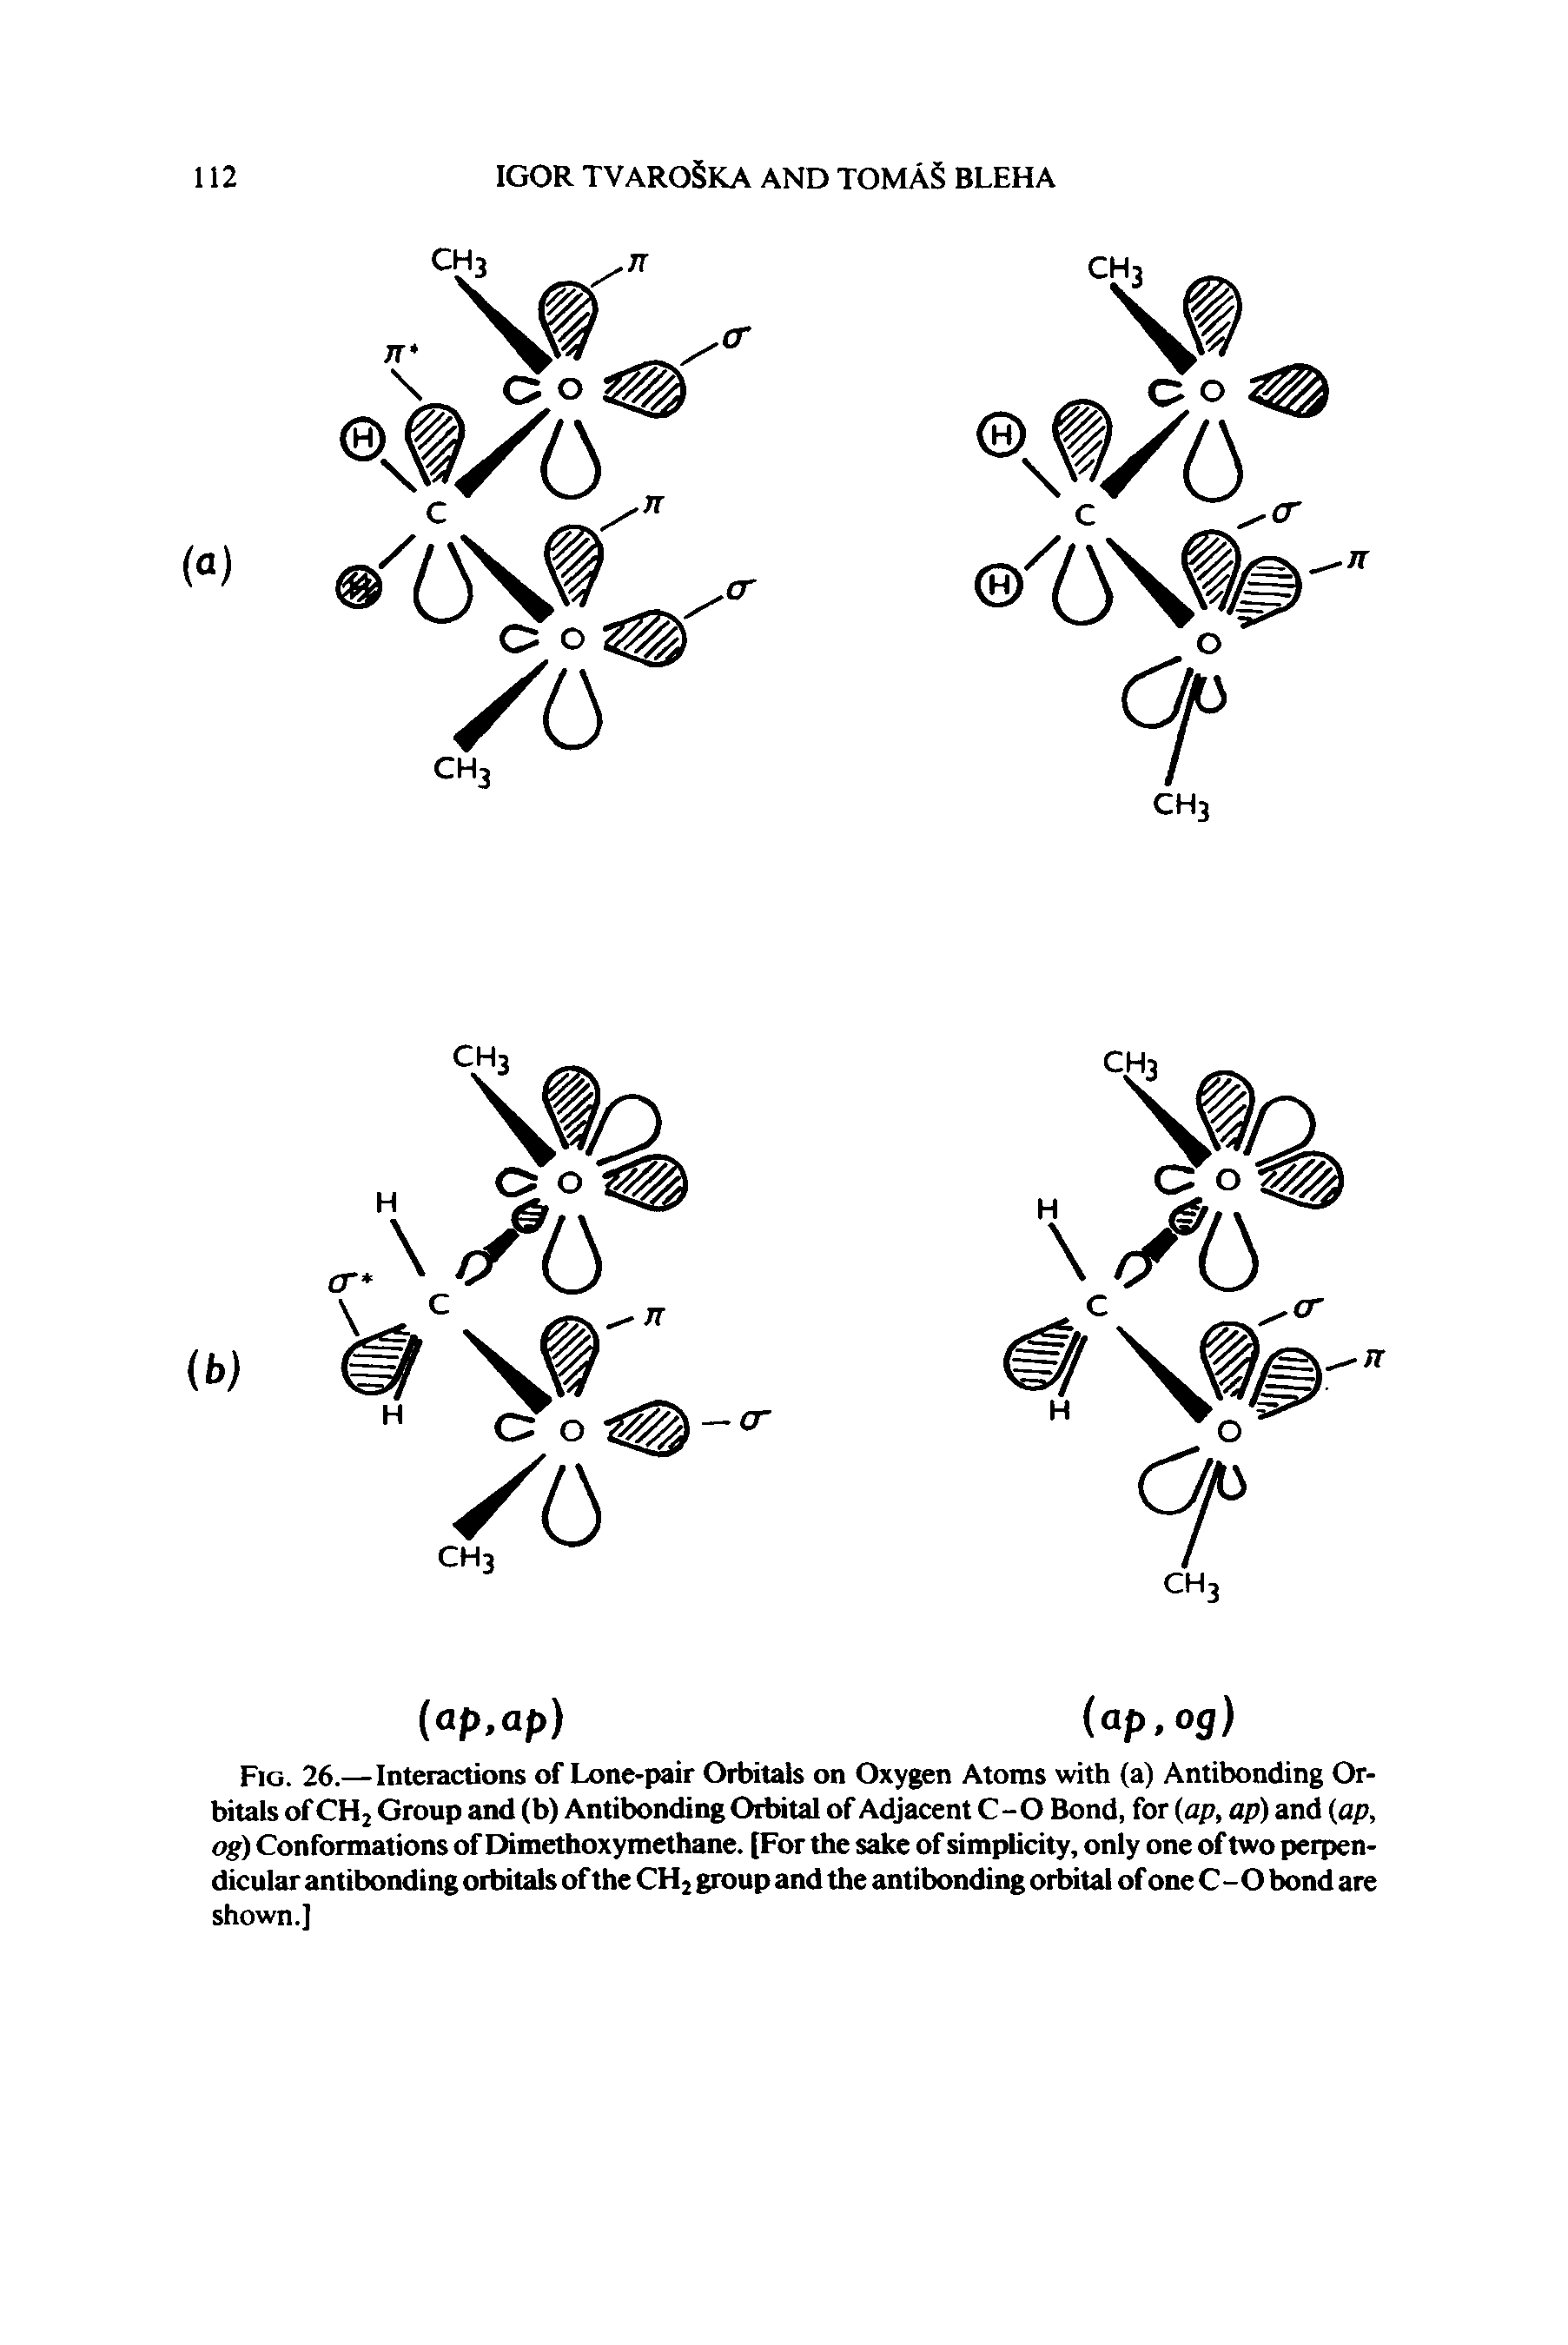 Fig. 26.—Interactions of Lone-pair Orbitals on Oxygen Atoms with (a) Antibonding Orbitals of CHj Group and (b) Antibonding Orbital of Adjacent C - O Bond, for (ap, ap) and (ap, og) Conformations of Dimethoxy methane. [For the sake of simplicity, only one of two perpendicular antibonding orbitals of the CH2 group and the antibonding orbital of one C - O bond are shown.]...